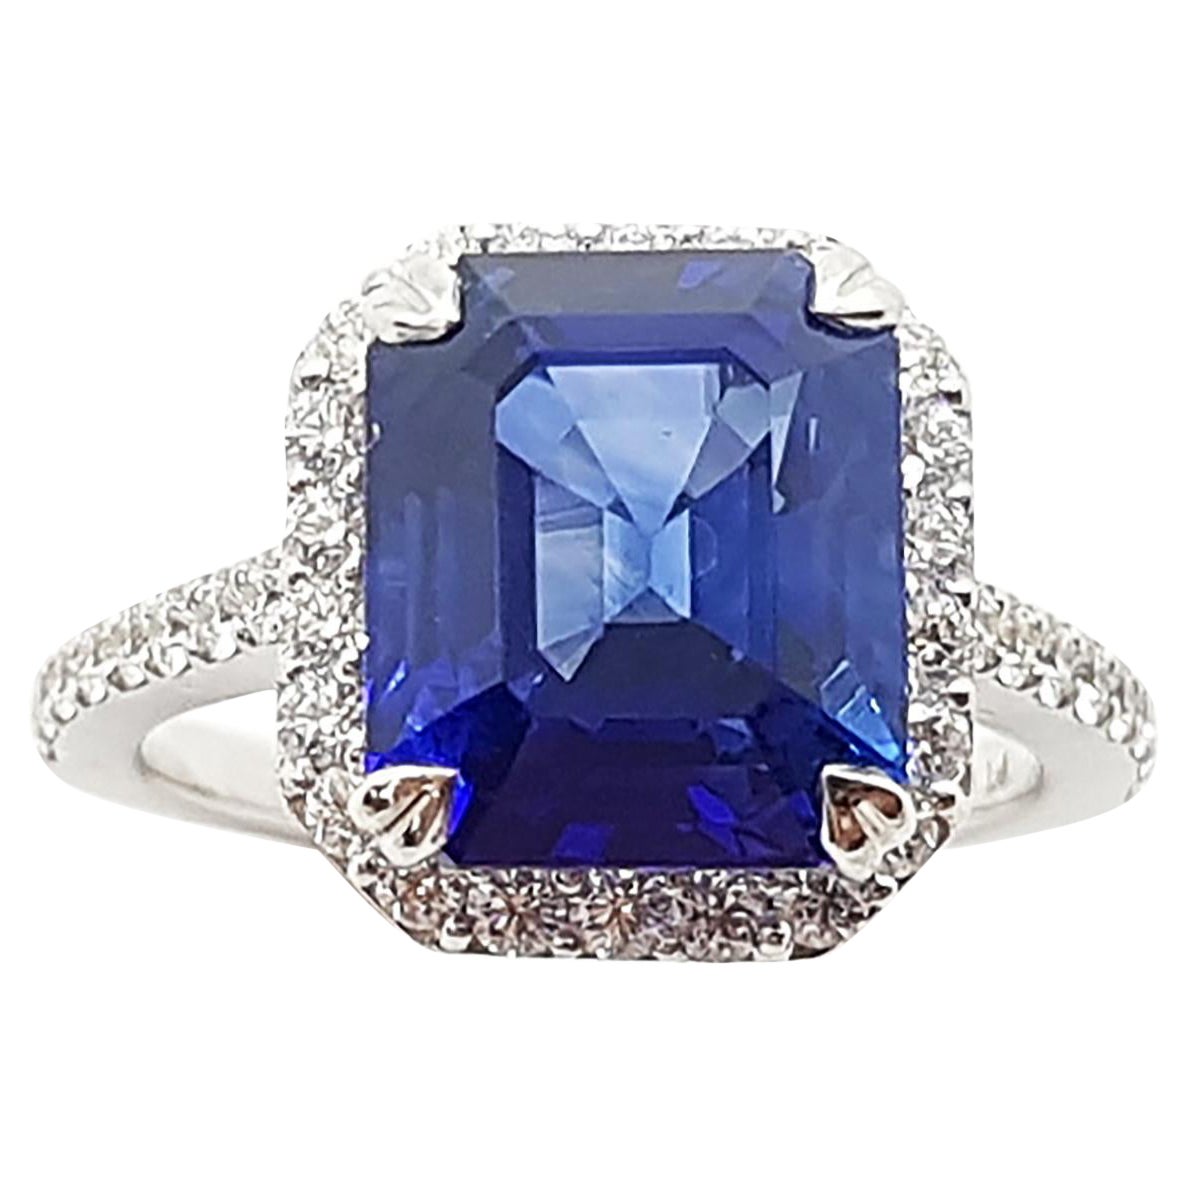 GRS Certified 5 Cts Ceylon Blue Sapphire with Diamond Ring in Platinum 950 For Sale